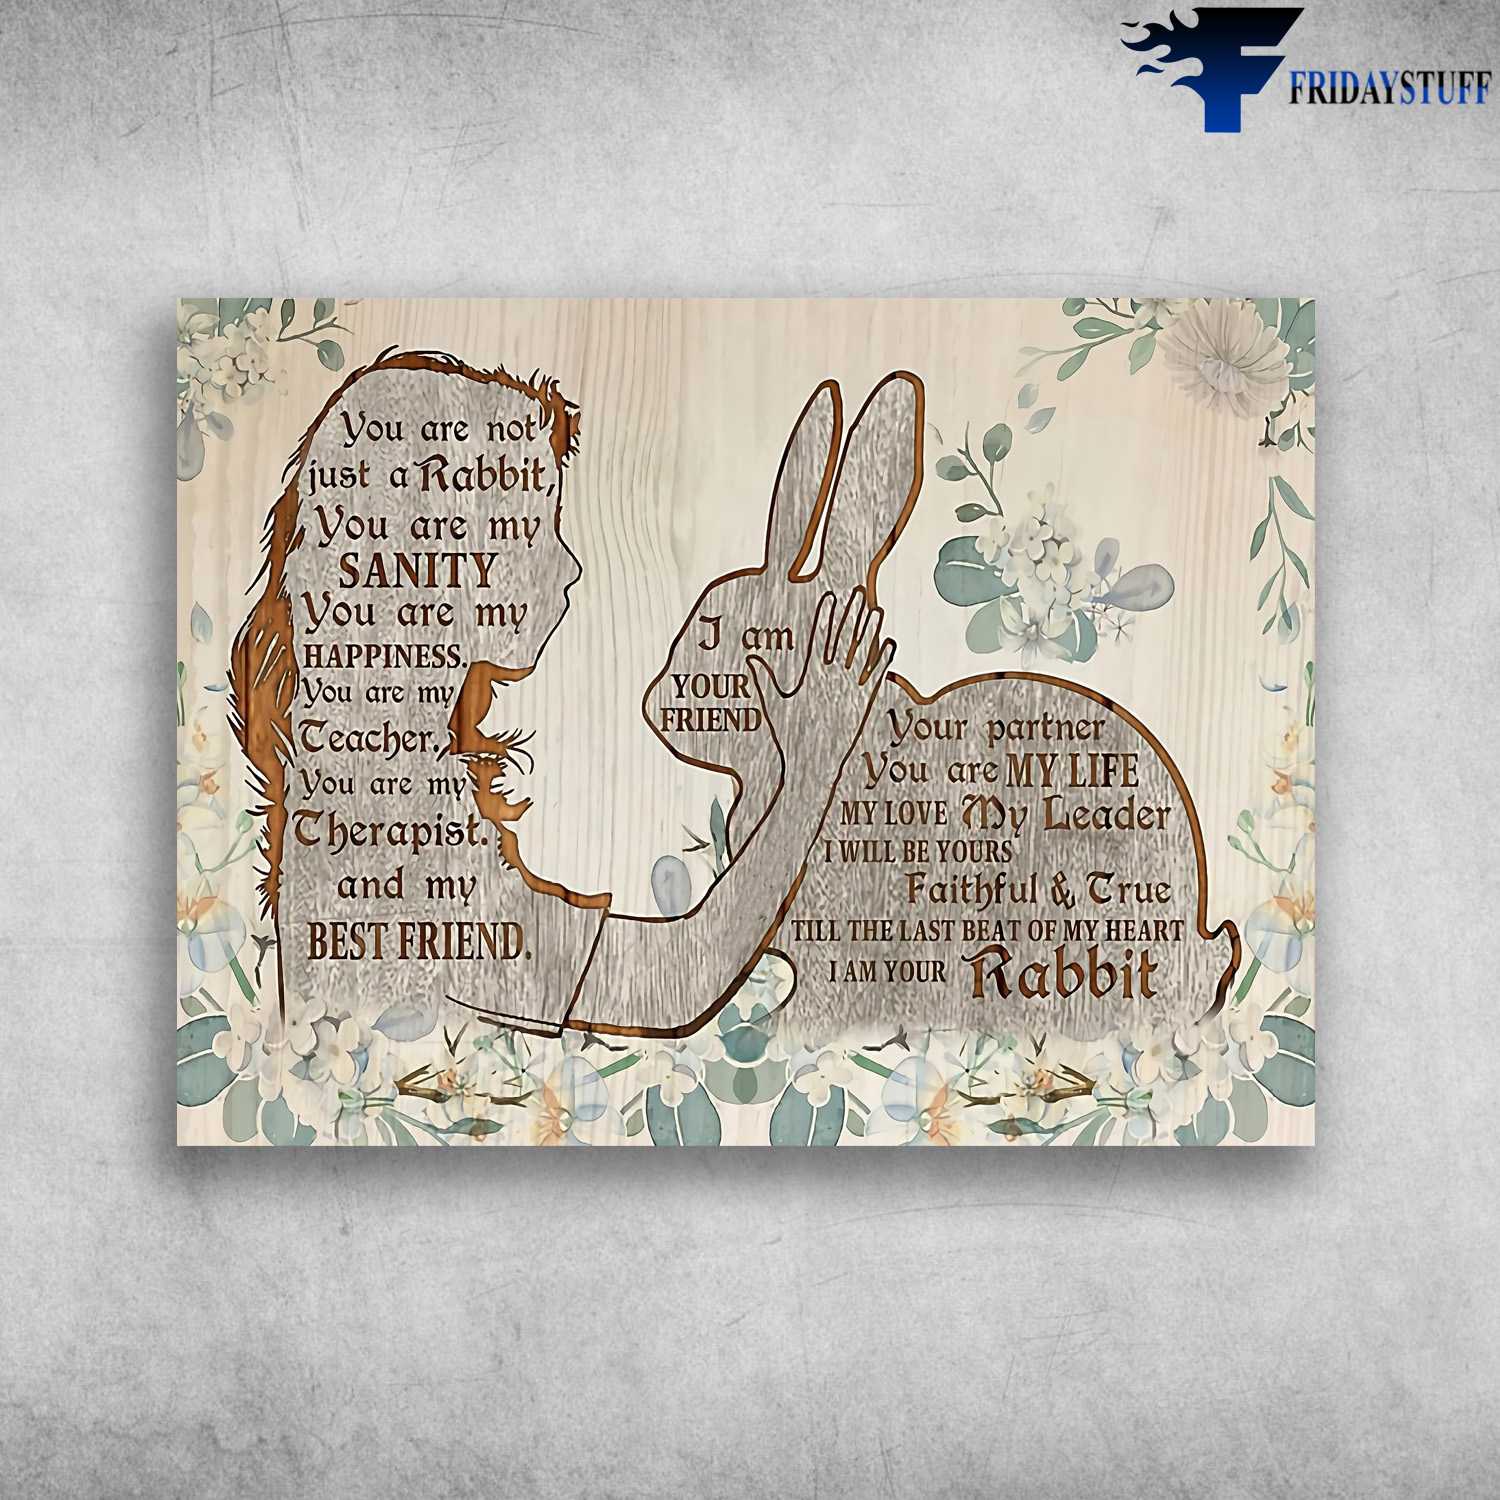 Girl And Rabbit, Bunny Lover - You Are Not Just A Rabbit, You Are My Sanity, You Are Happiness, You Are My Teacher, You Are My Therapist, And My Bestfriend, I Am Your Friend